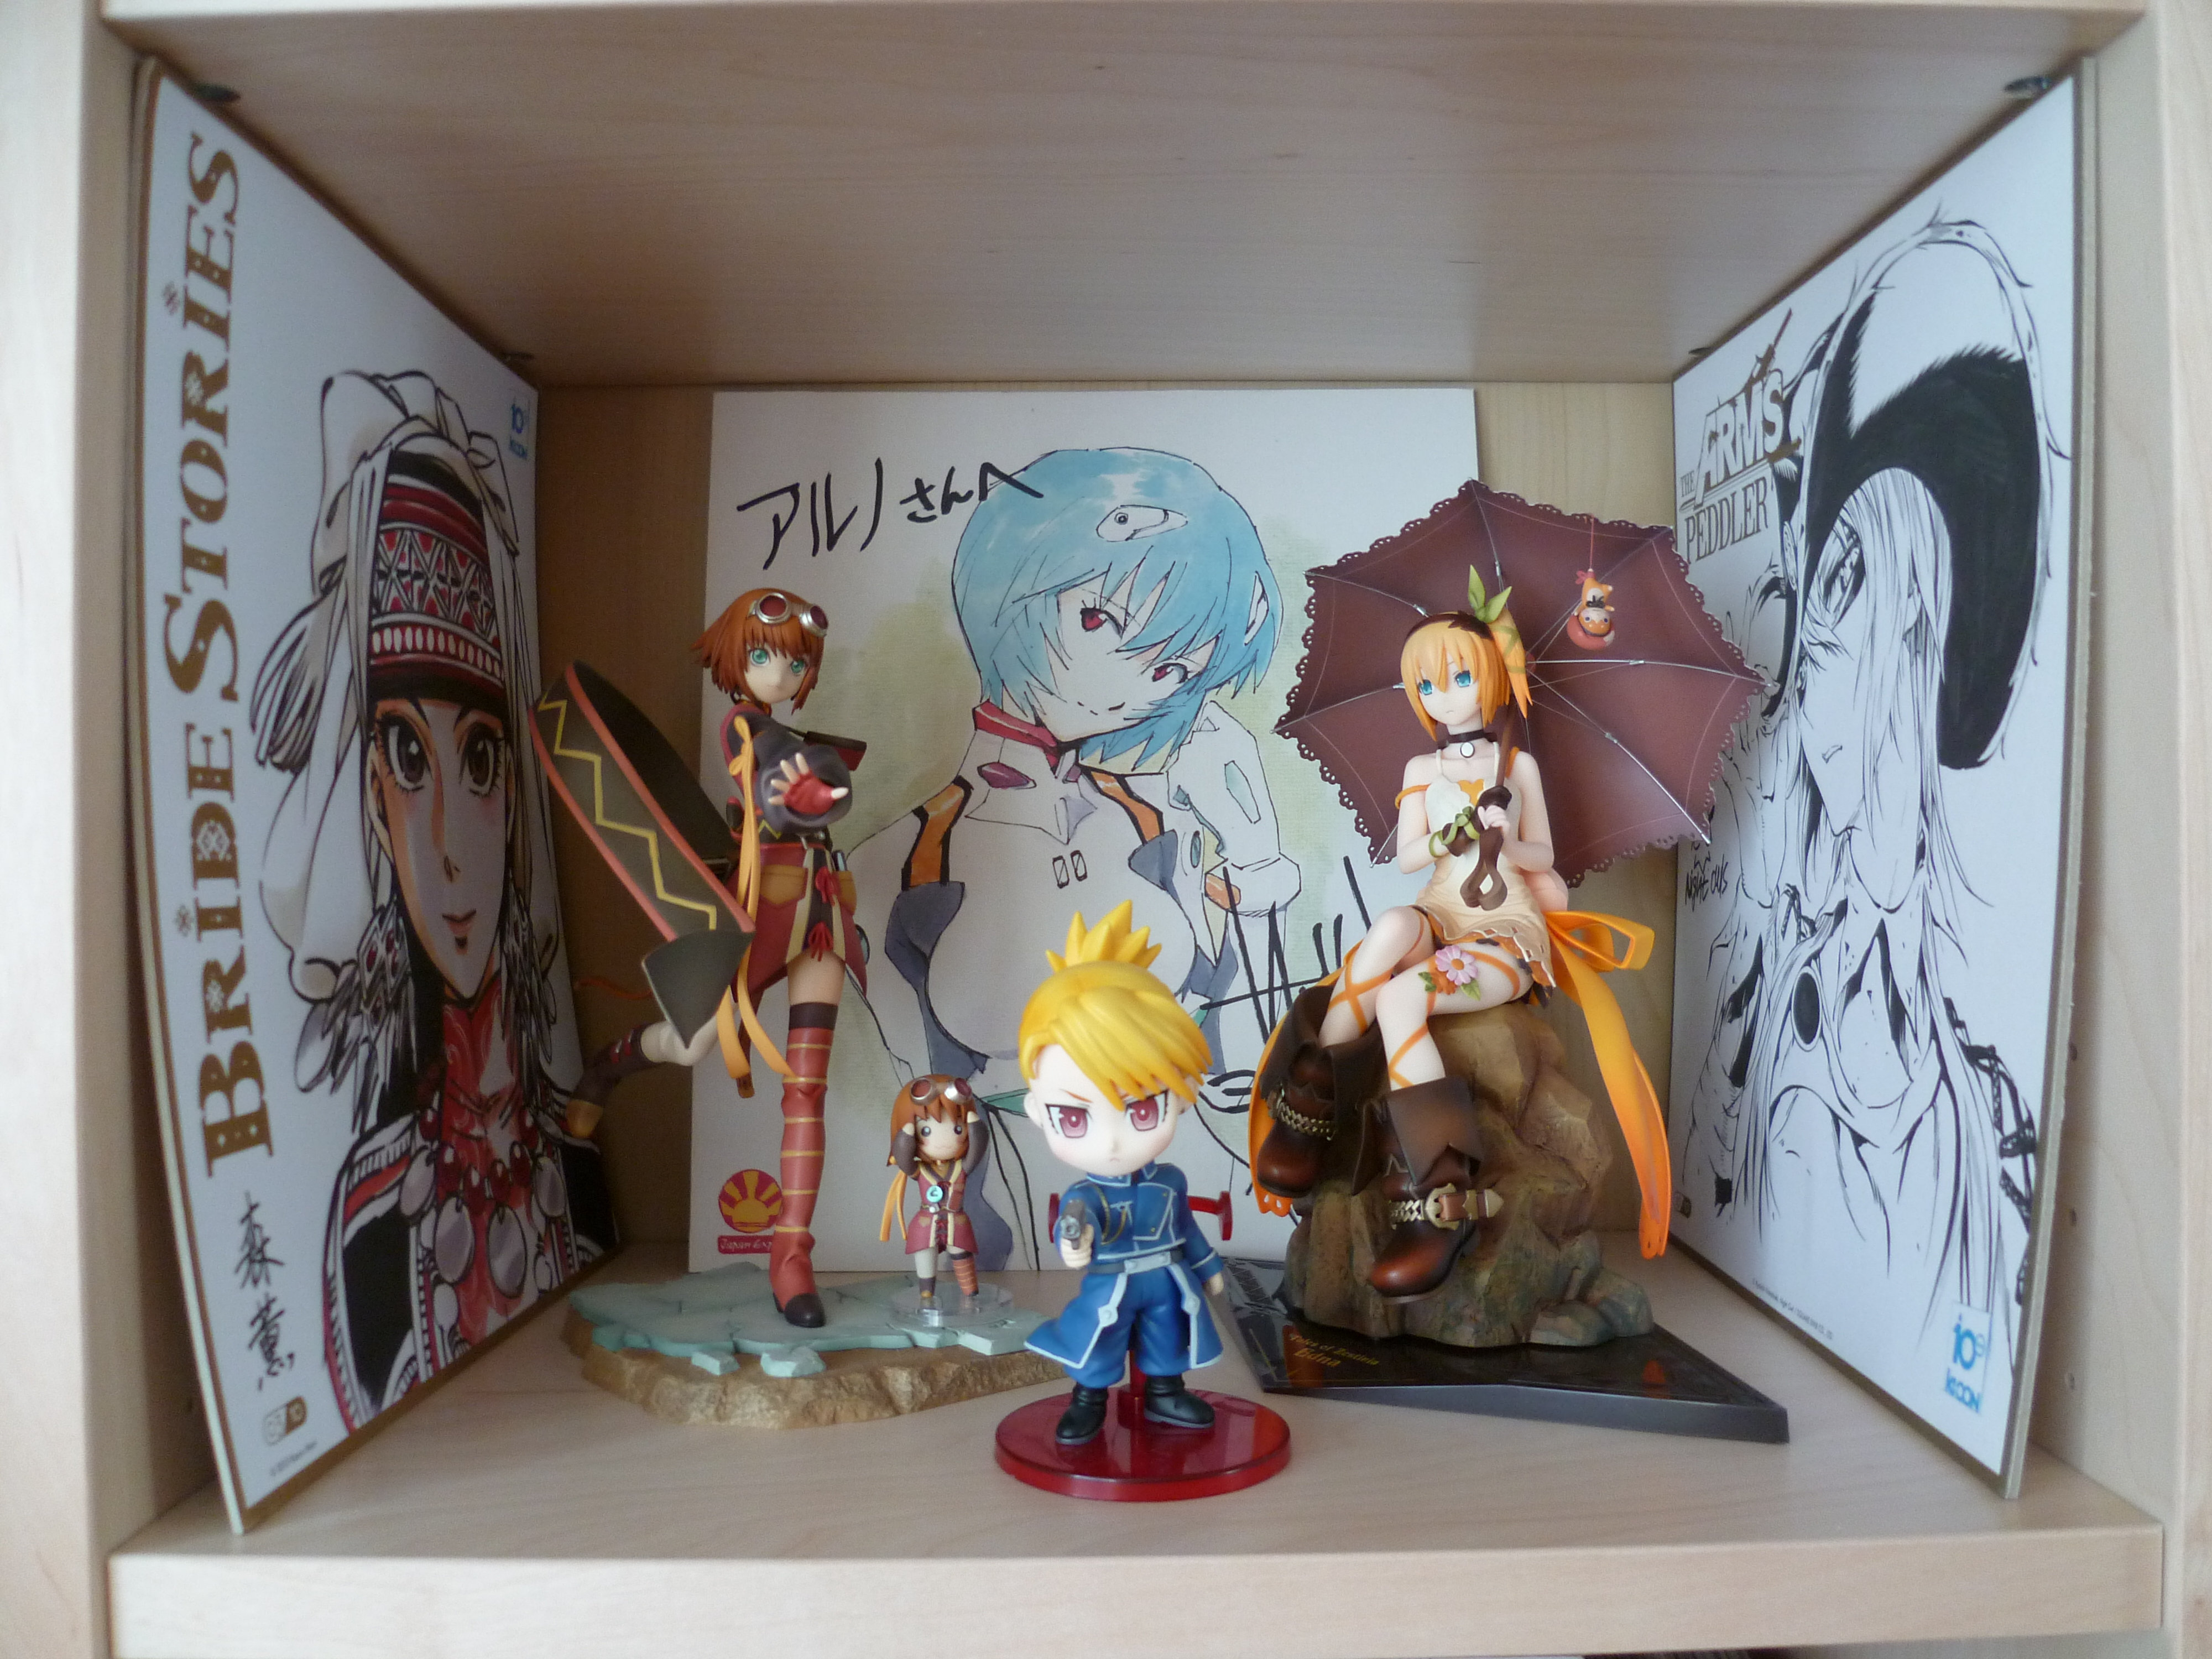 Collection - Vos collections d'otaku ! - Page 7 Qmcs